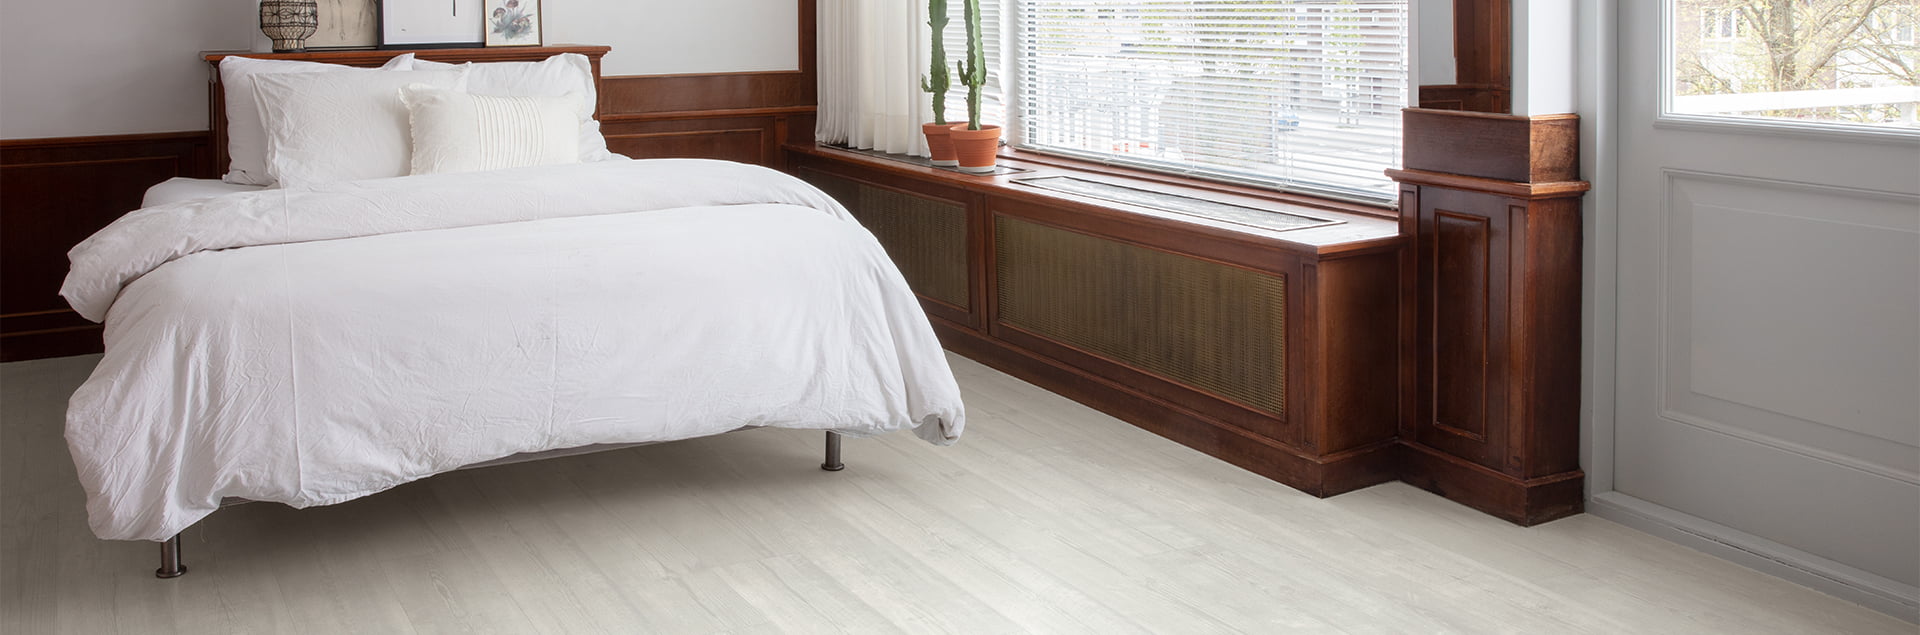 white vinyl flooring in a bedroom from Quick-Step